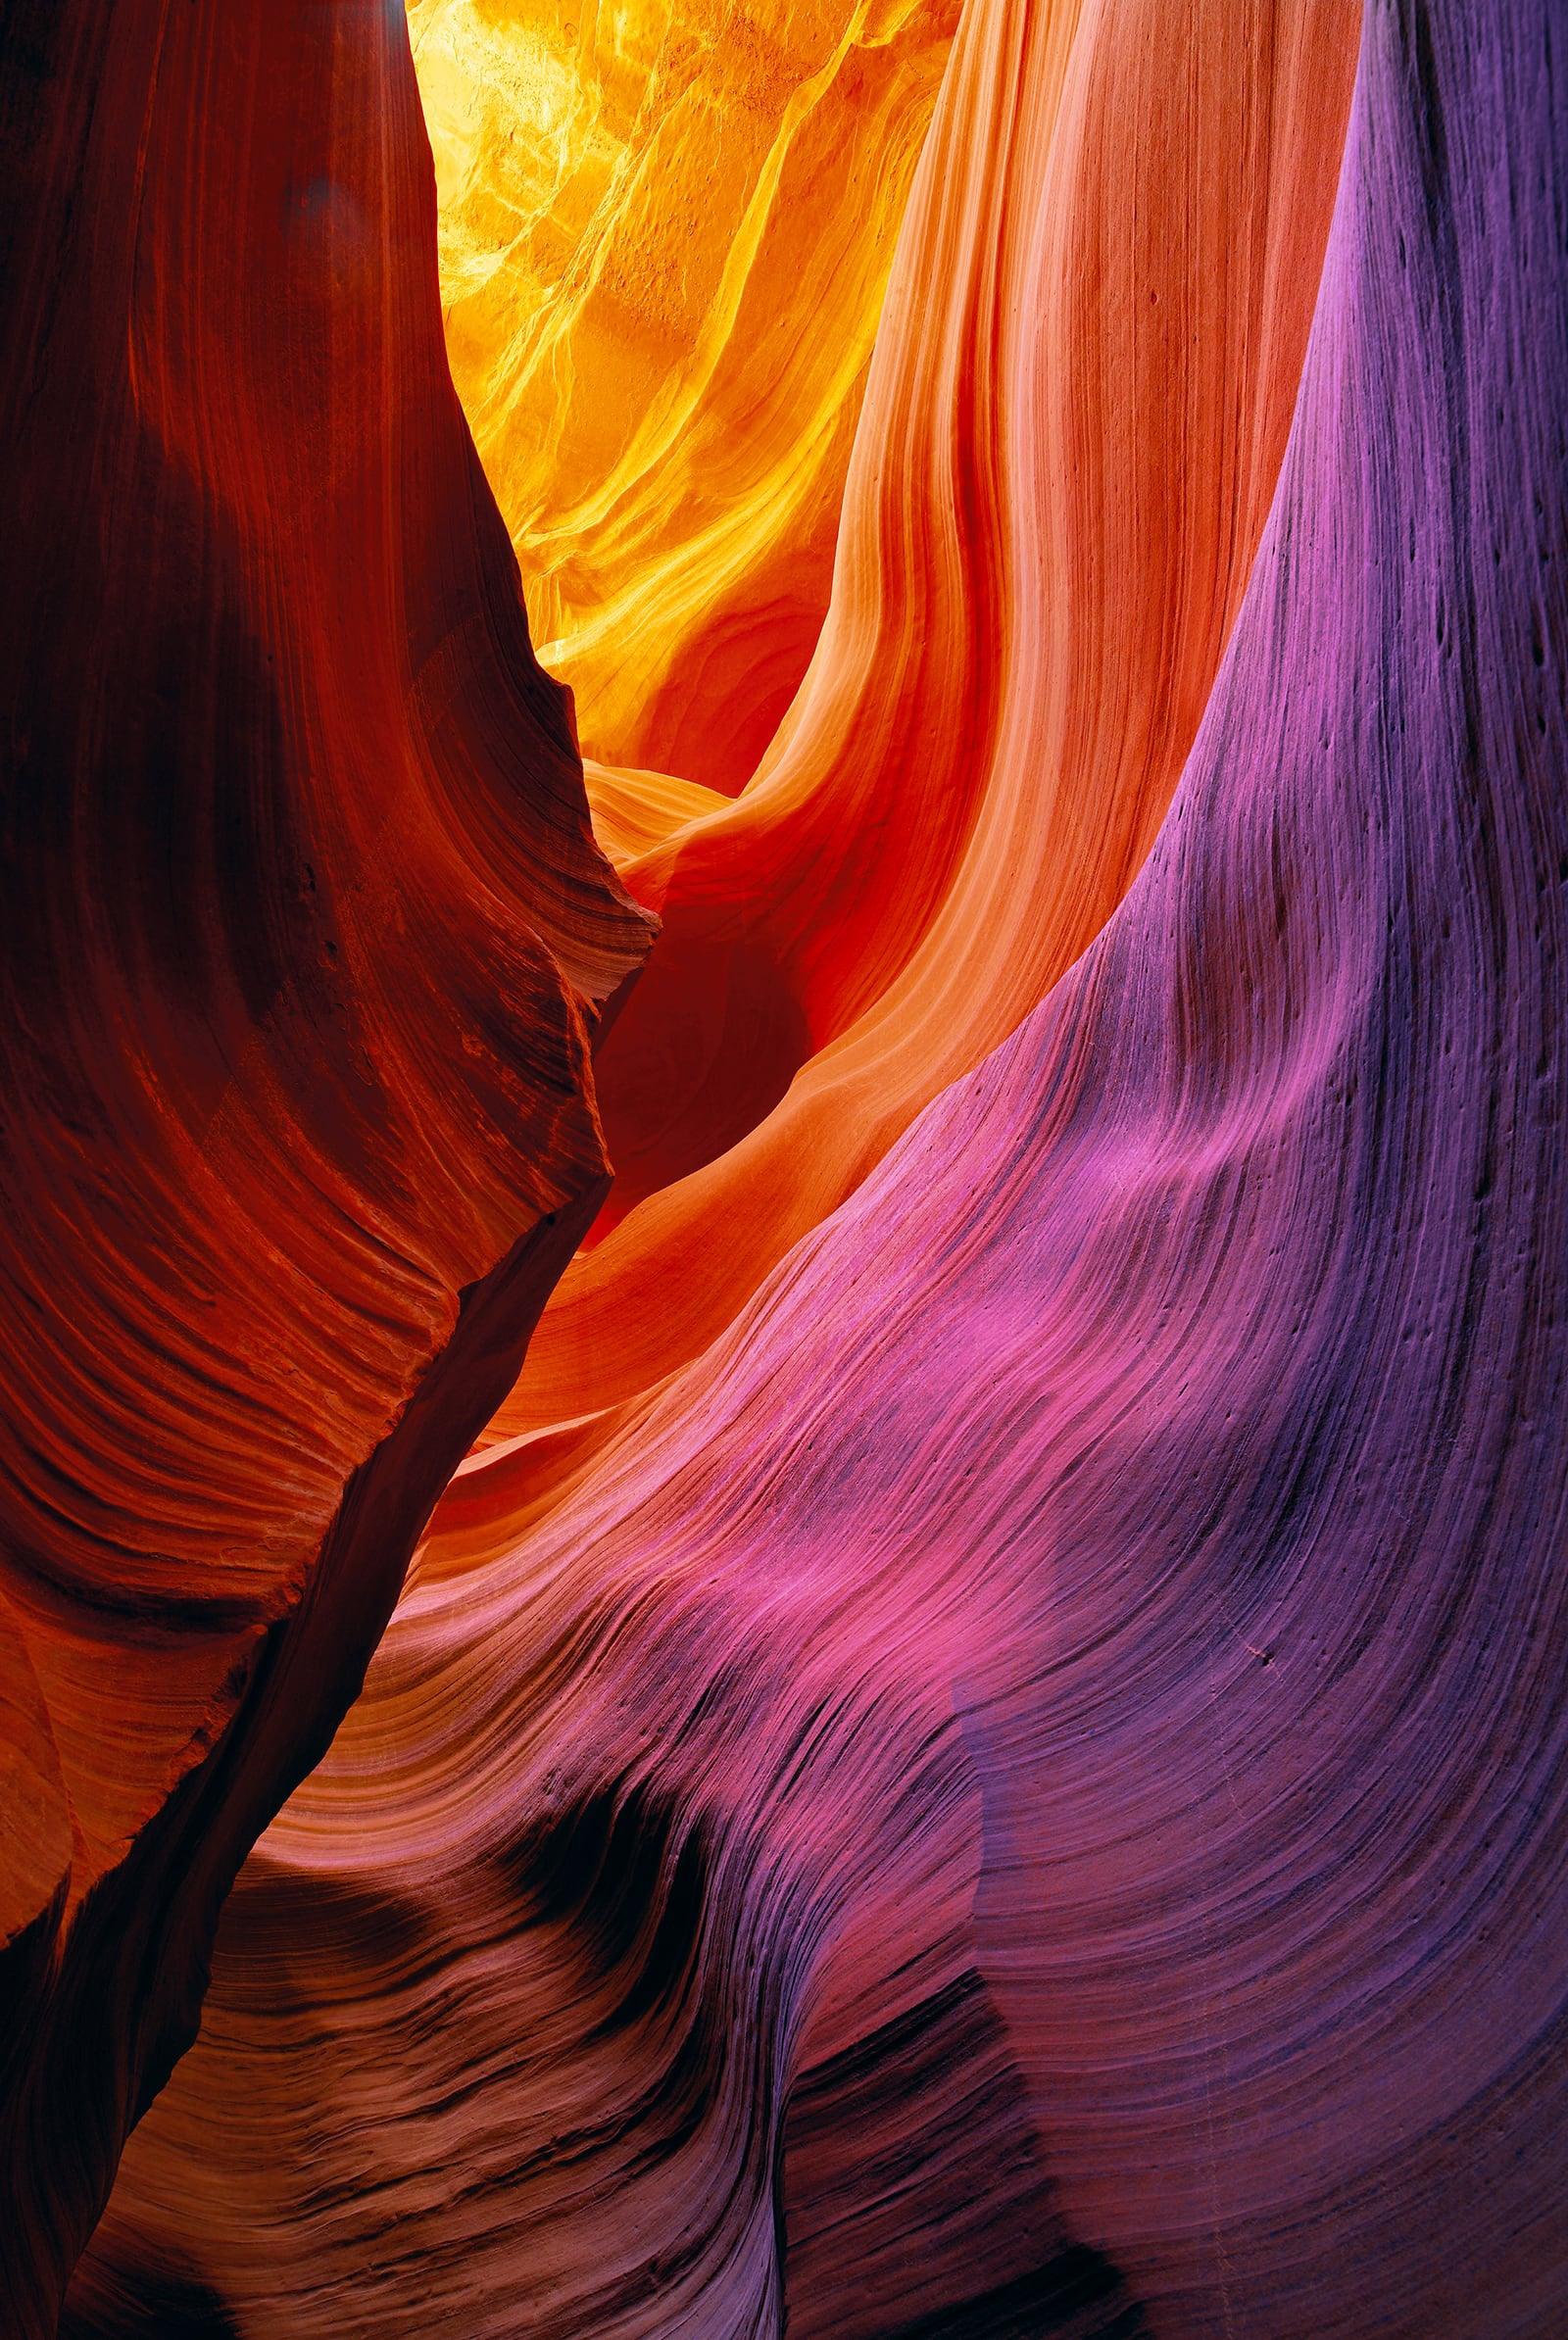 Red and pink wave shaped sandstone walls of the slot canyons in Antelope Canyon Arizona